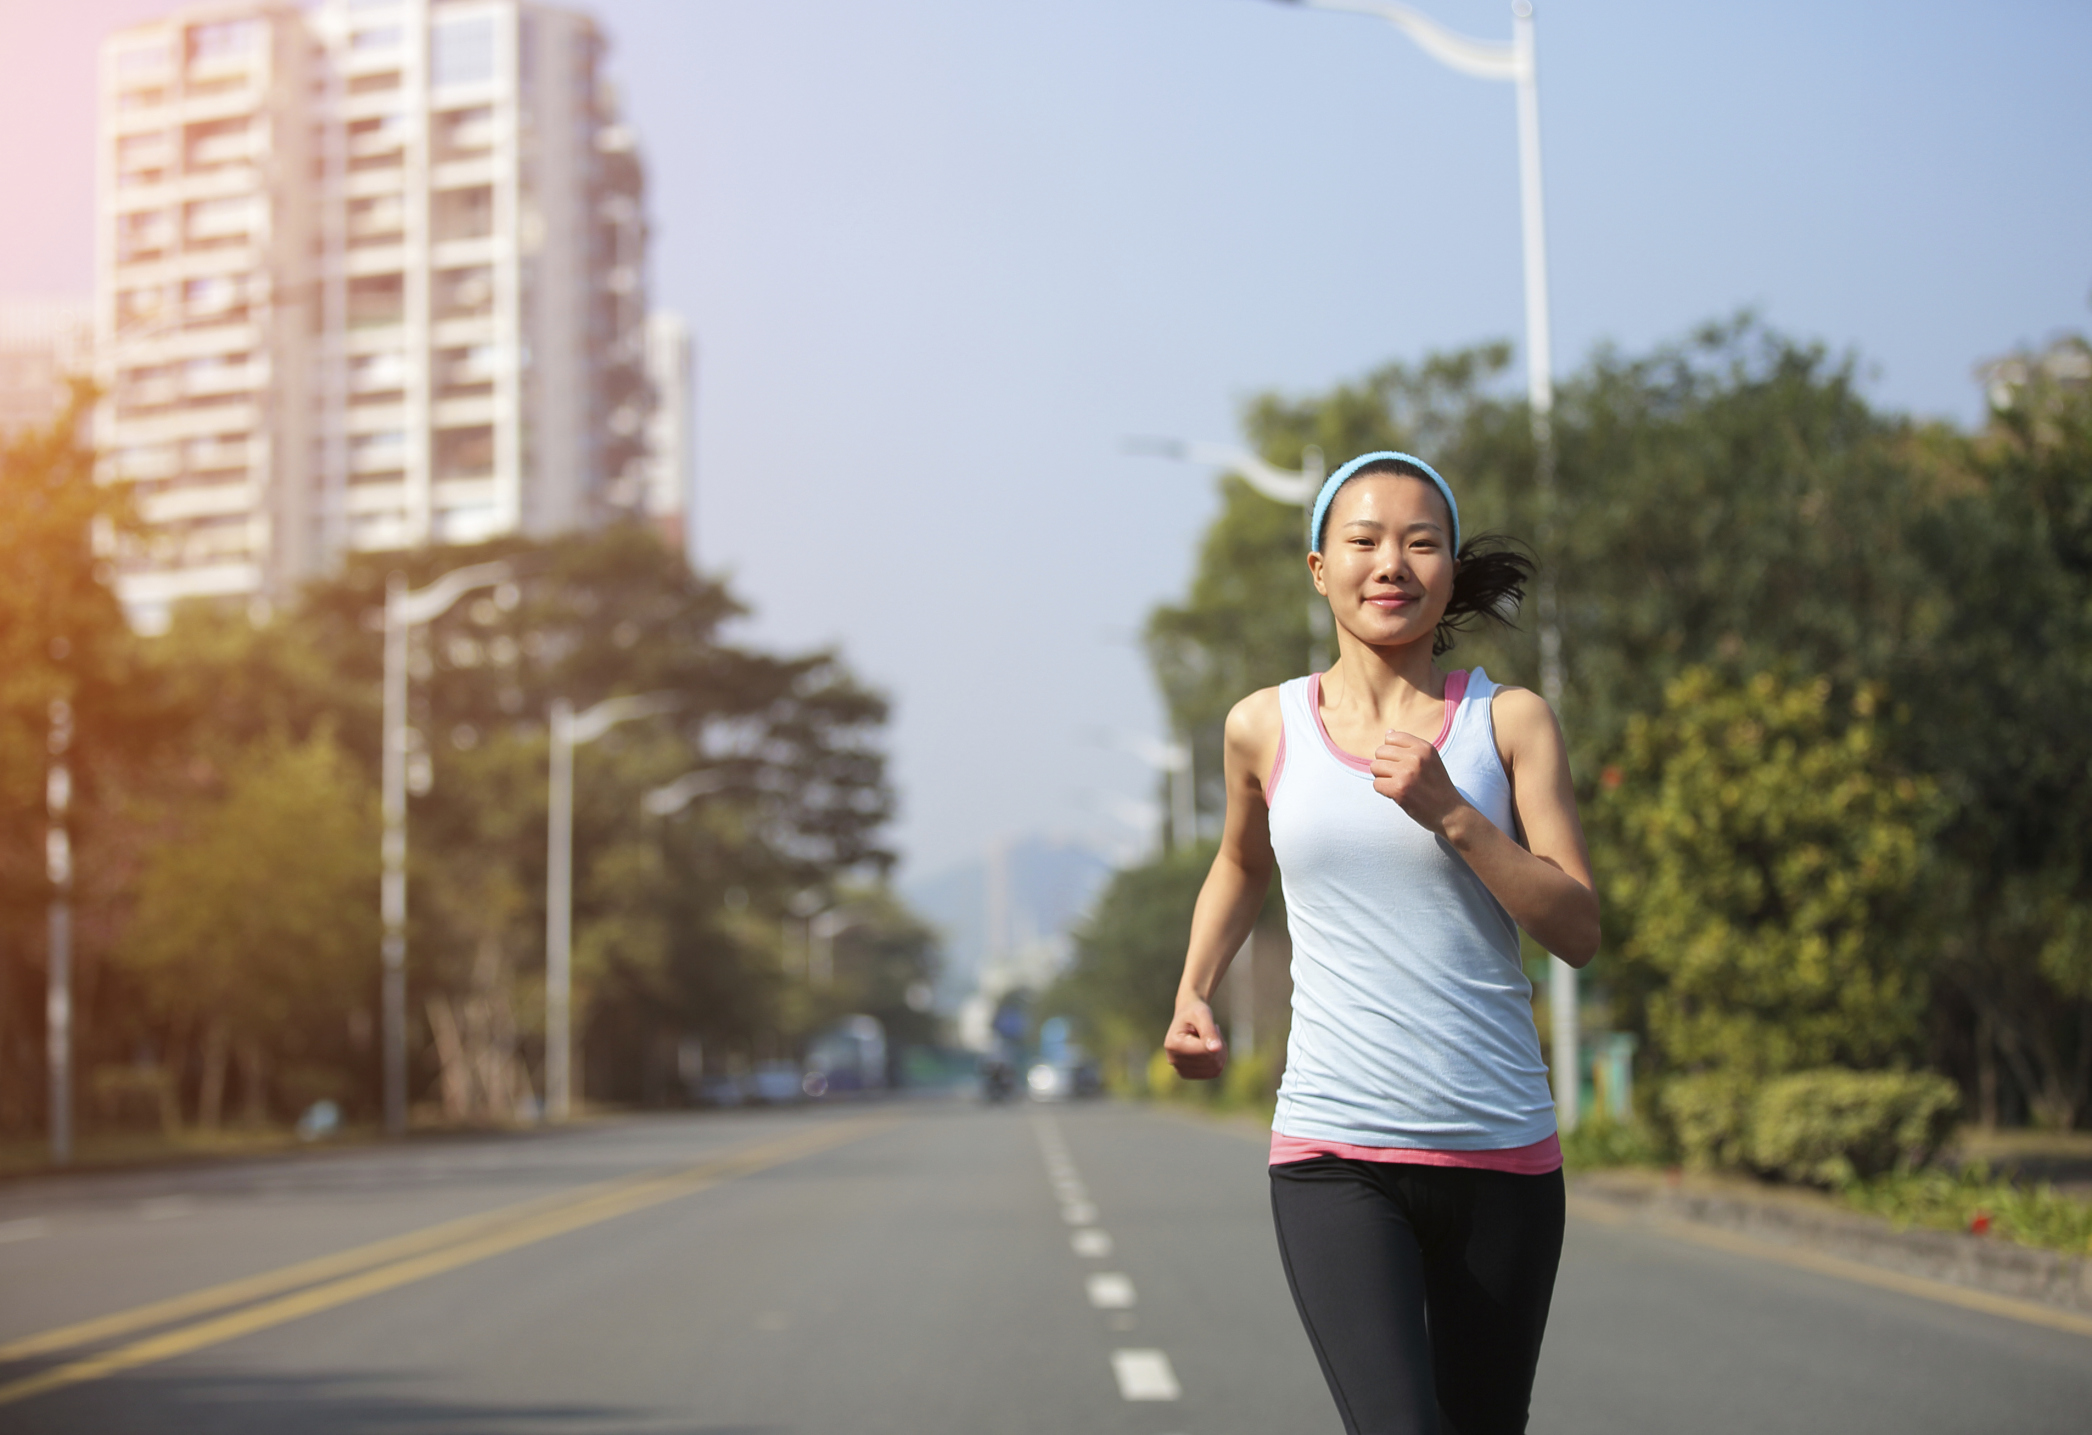 How Many Calories Are Burned in a 30-Minute Run?